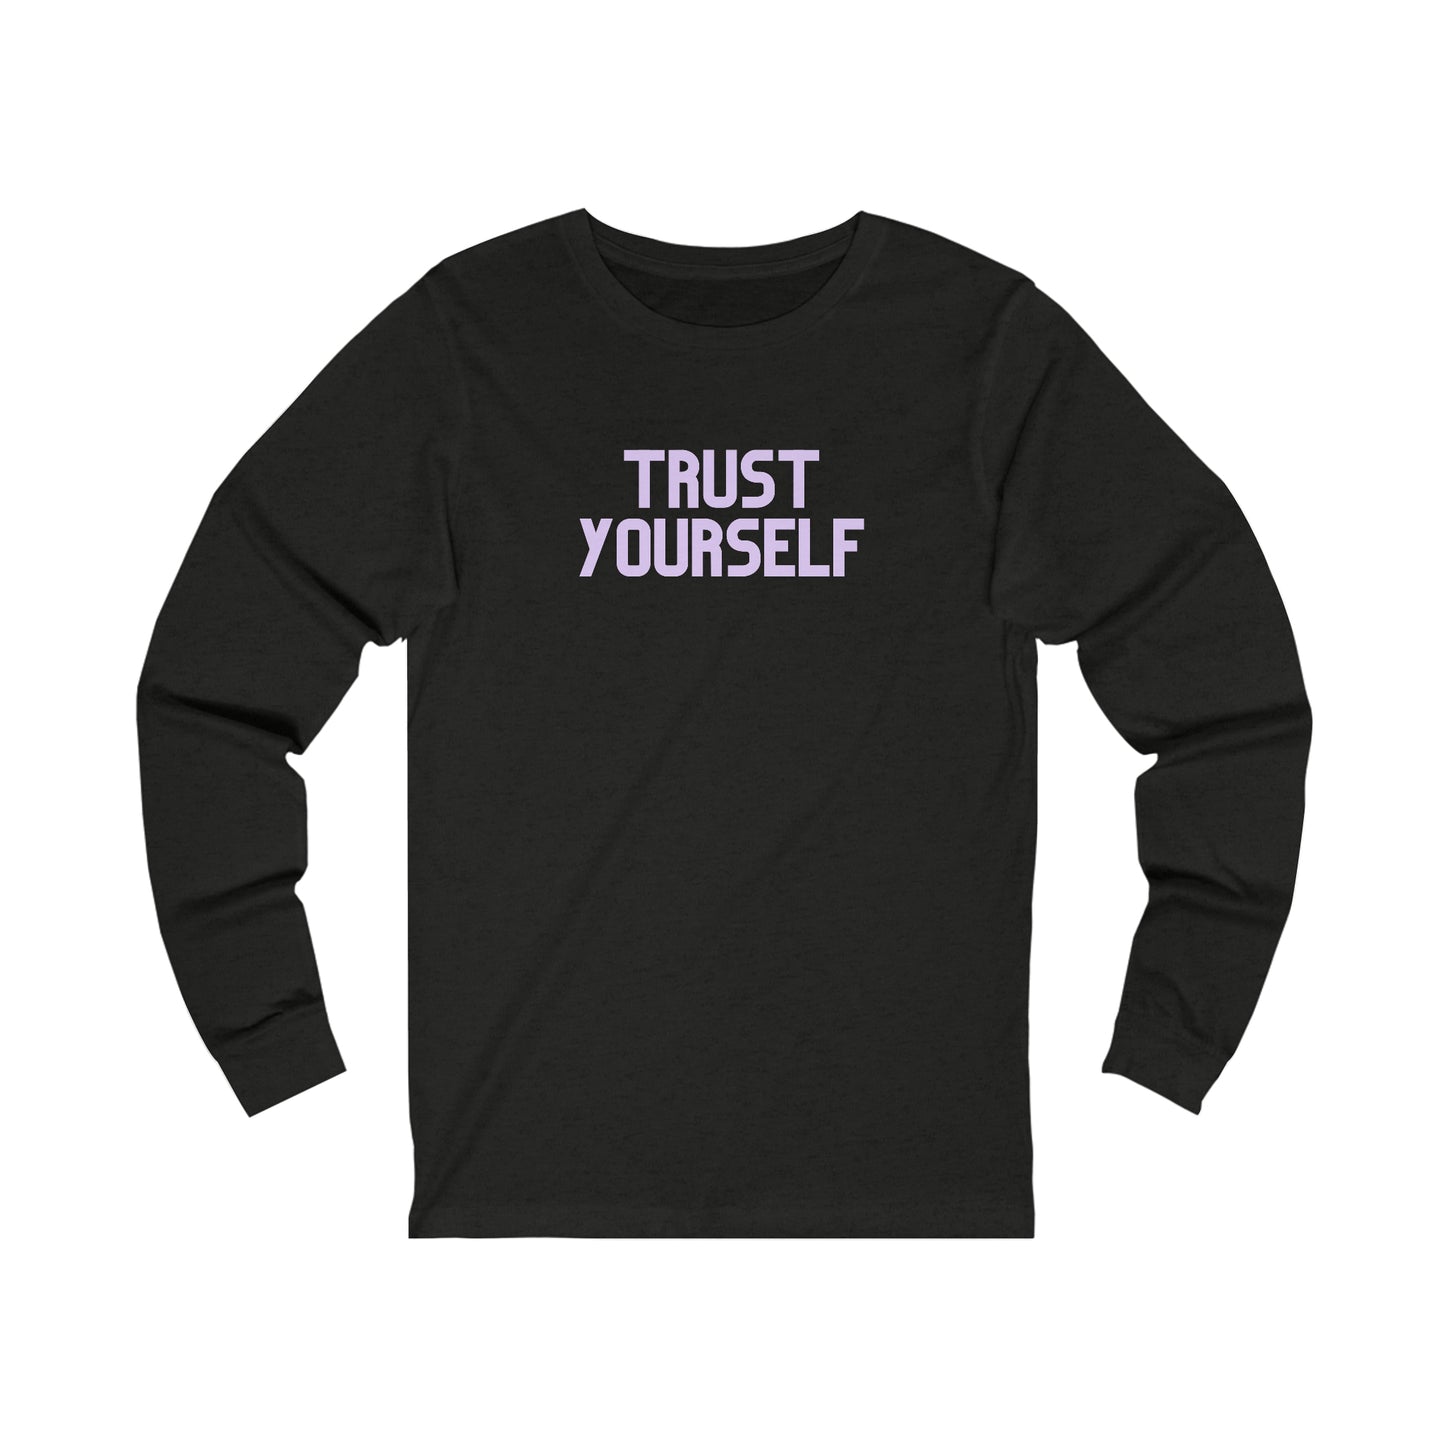 Simple "TRUST YOURSELF" message on this Unisex Jersey Long Sleeve Tee.